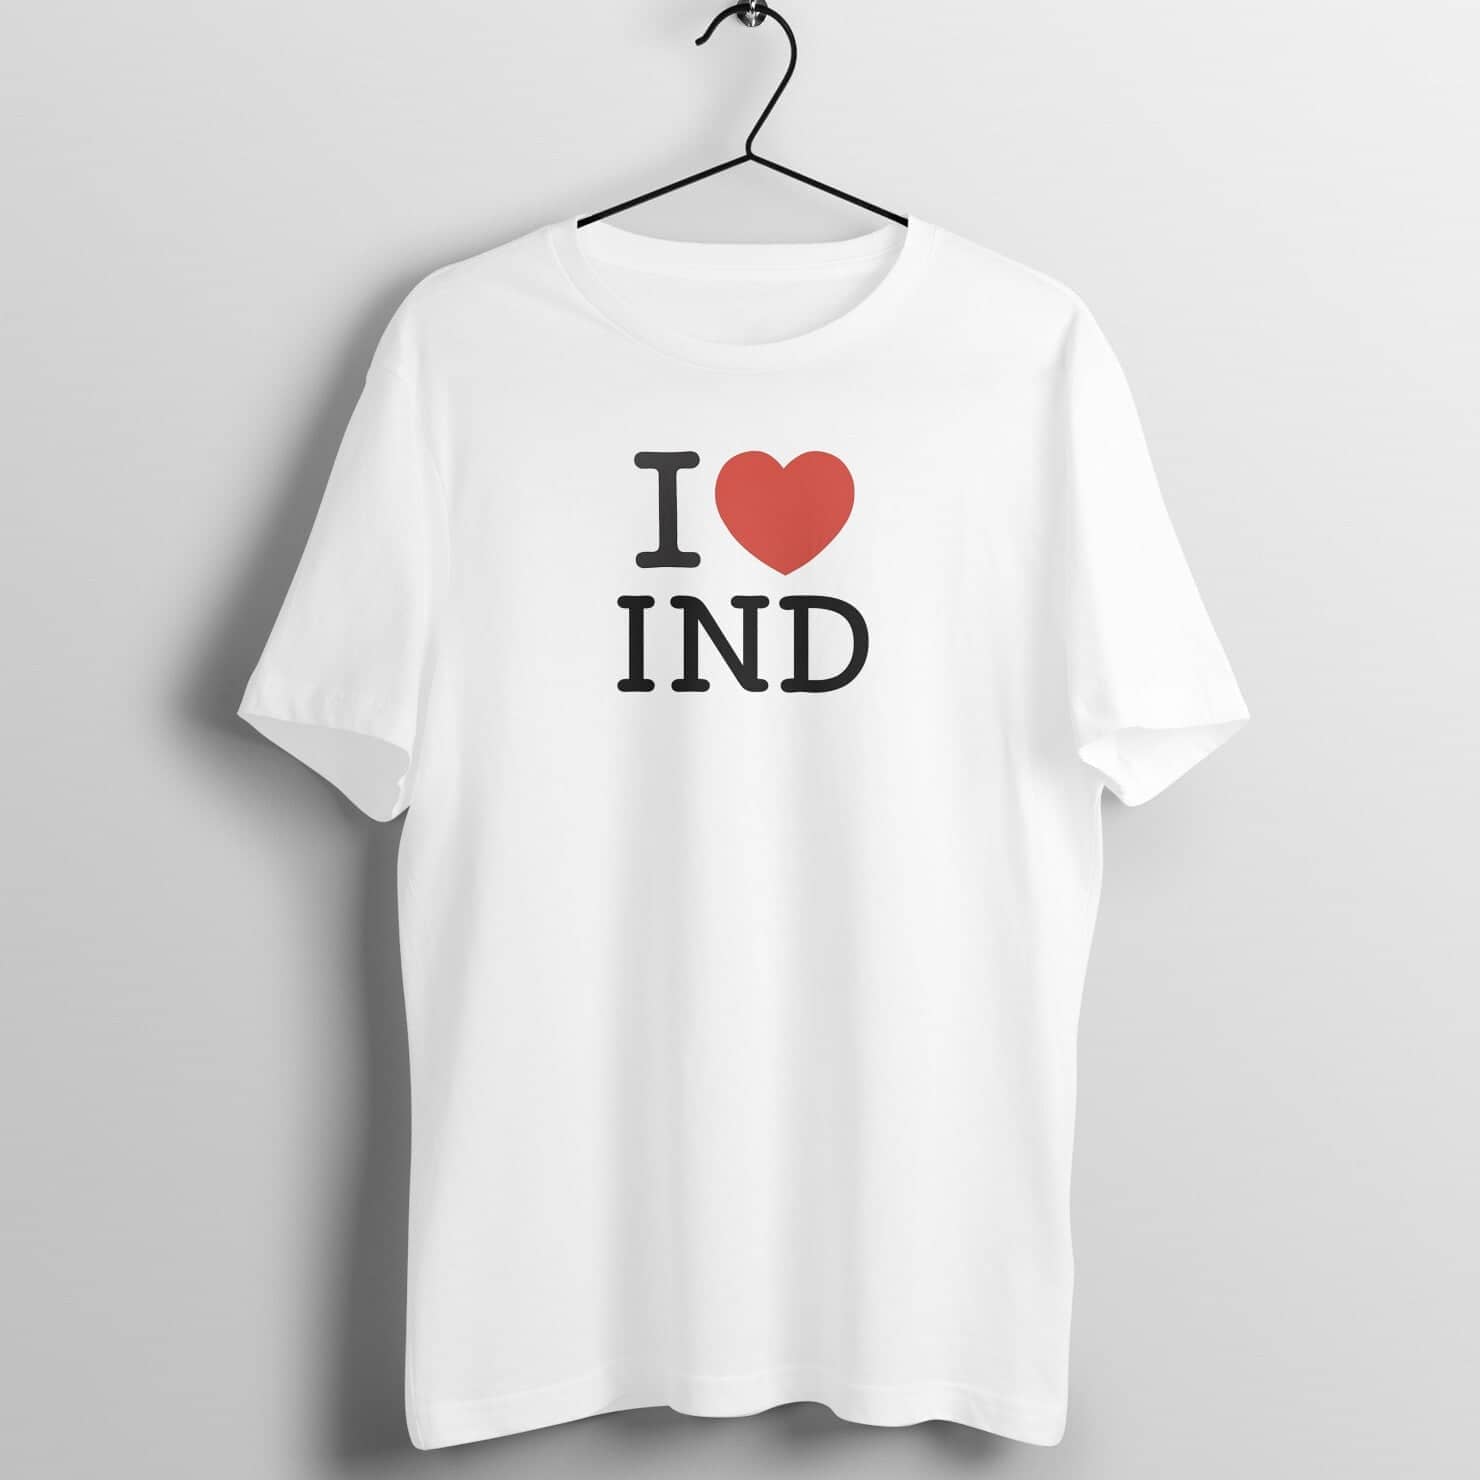 I Love India Supreme Patriotic White T Shirt for Men and Women freeshipping - Catch My Drift India